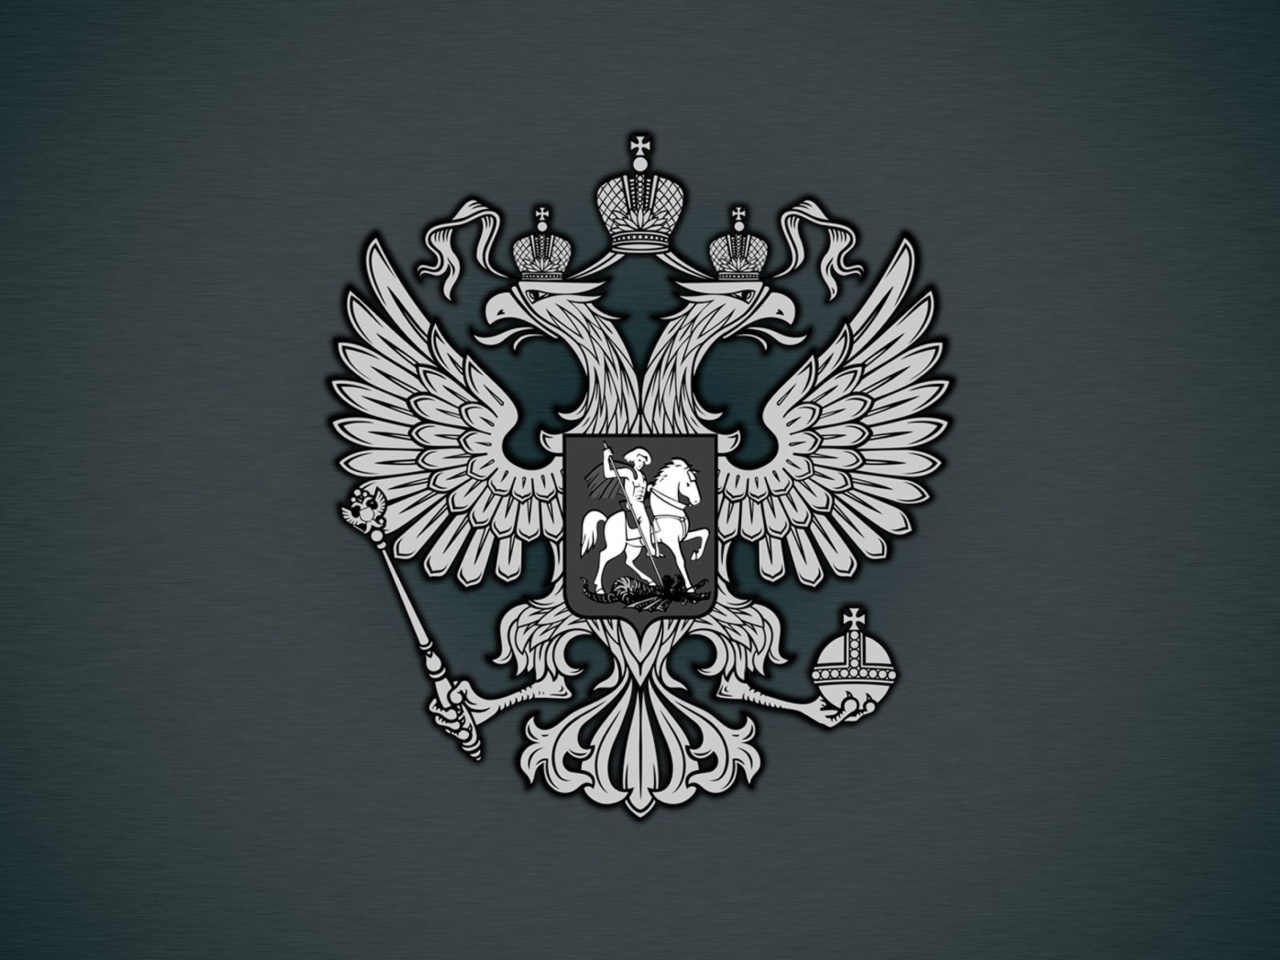 Coat of arms of Russia wallpaper 1280x960